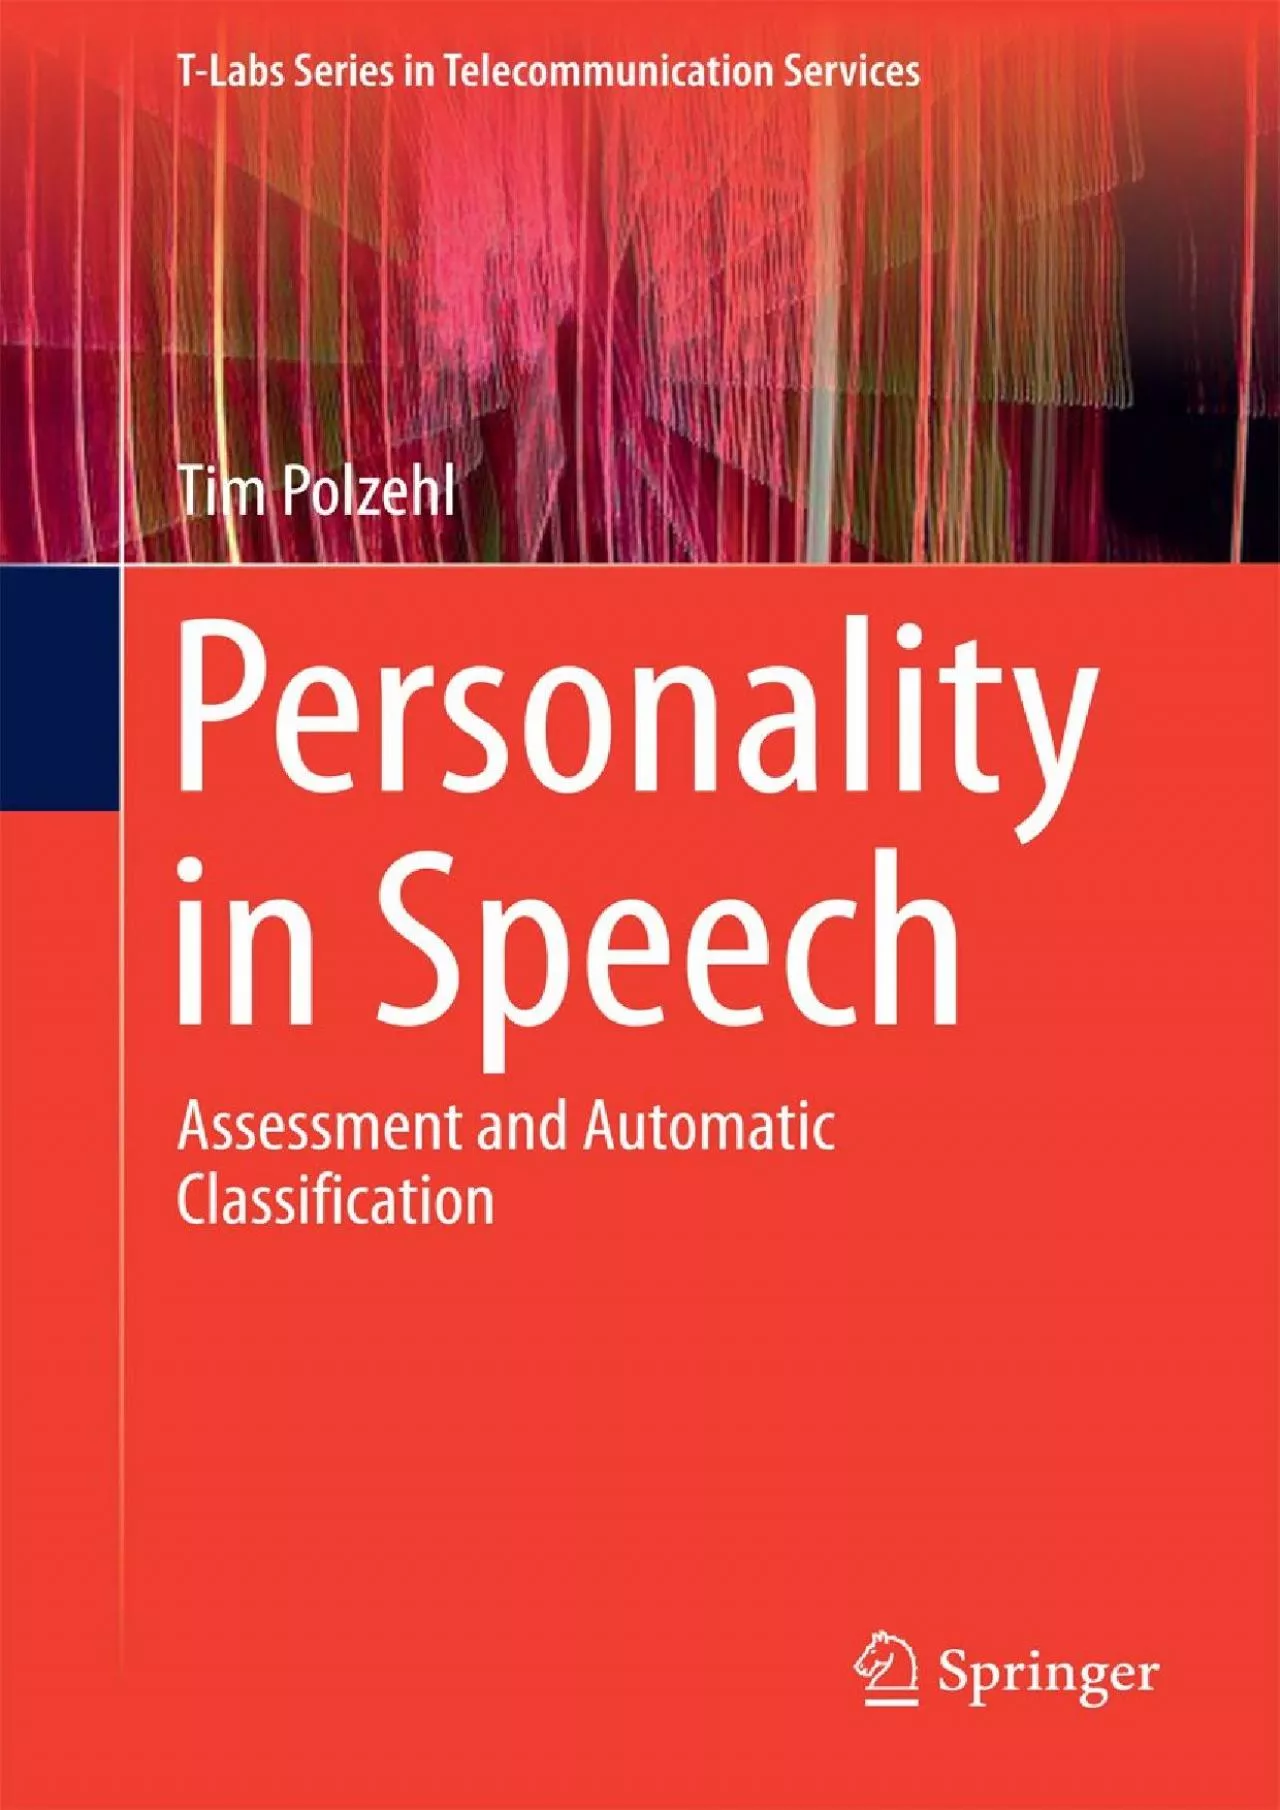 (BOOK)-Personality in Speech Assessment and Automatic Classification (T-Labs Series in